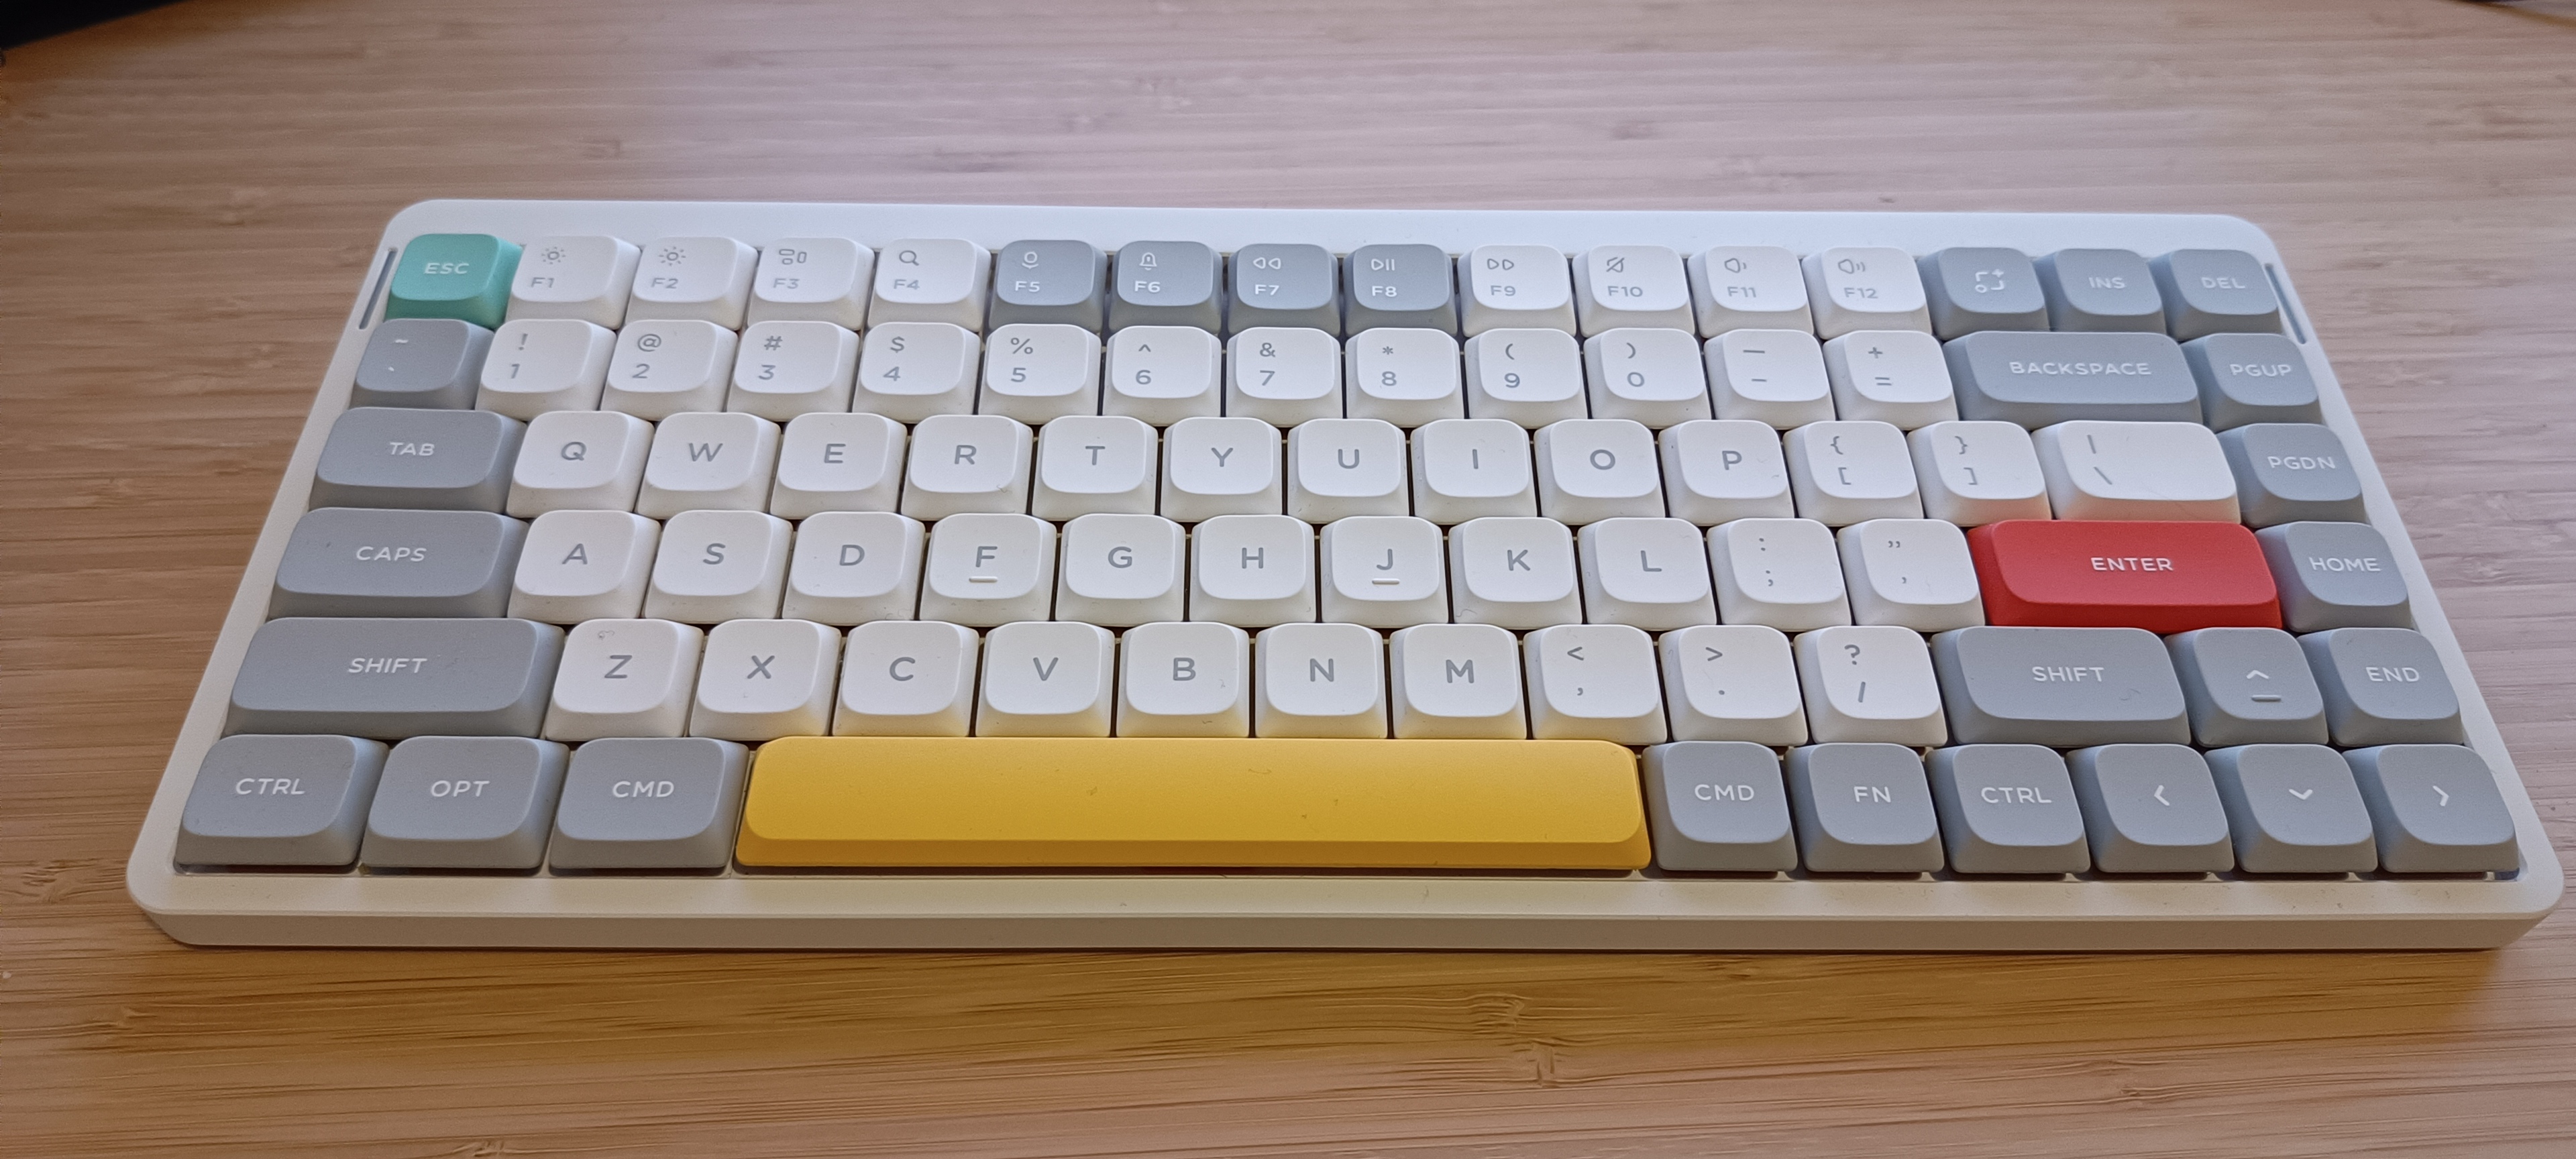 NuPhy Air75 V2 review: Mac-friendly mech keyboard looks nice